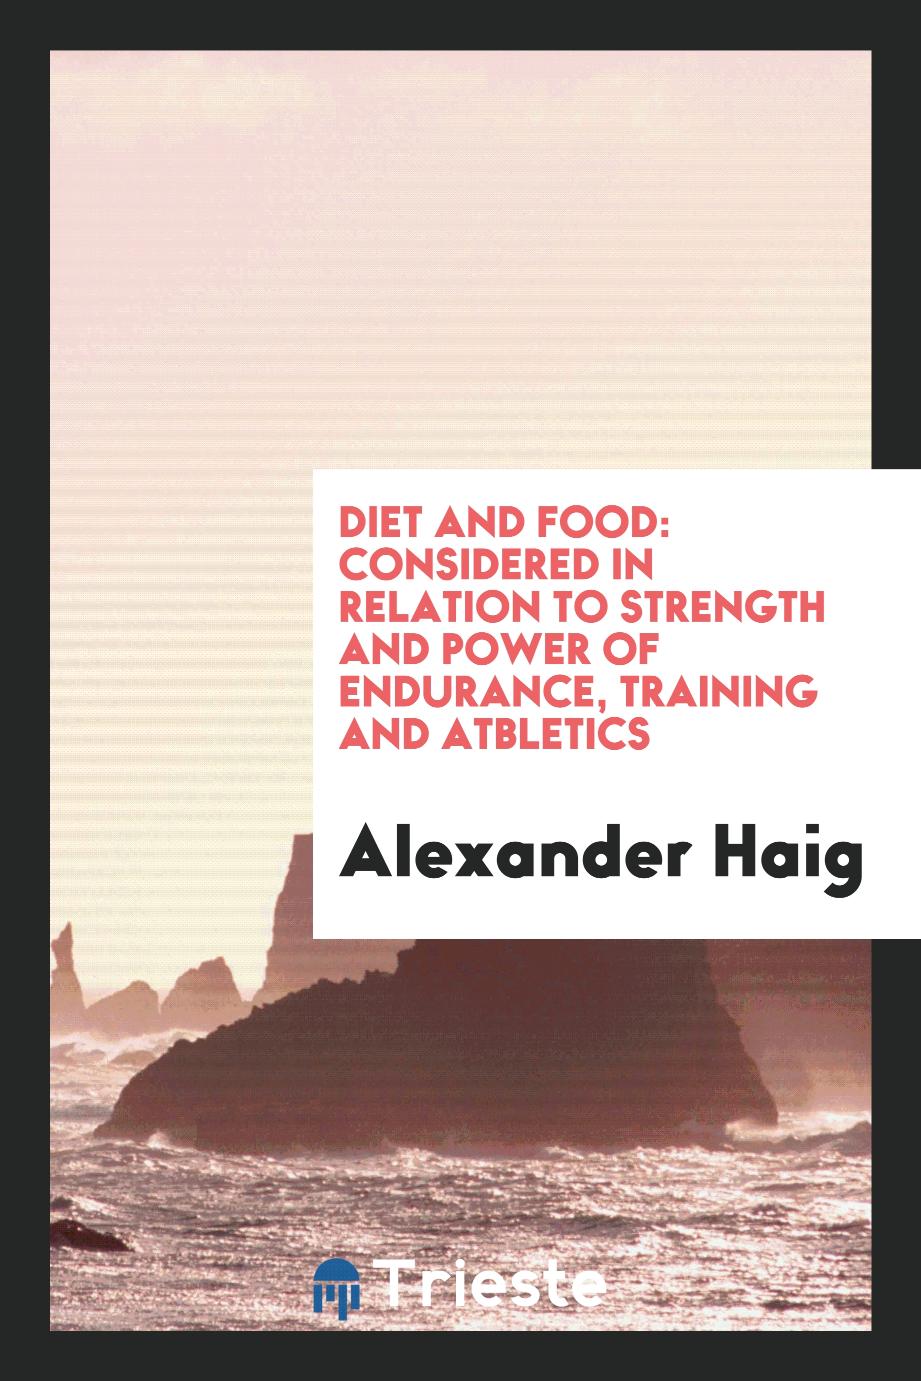 Diet and Food: Considered in Relation to Strength and Power of Endurance, Training and Atbletics